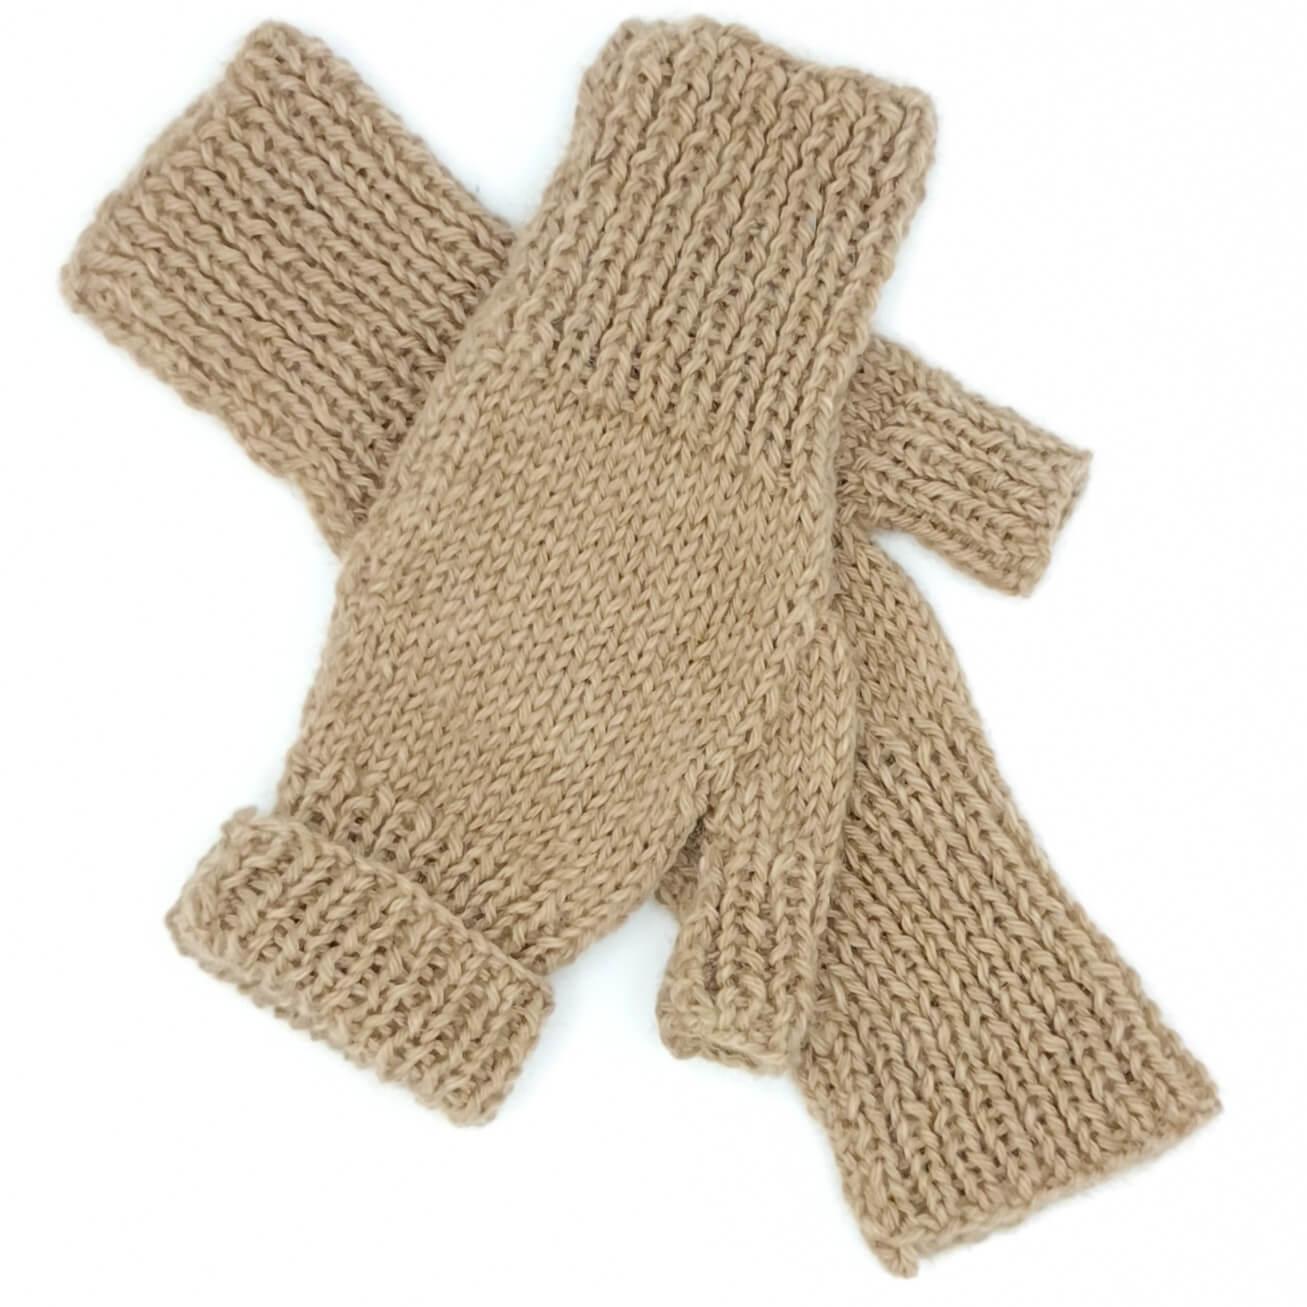 Fawn Gloves